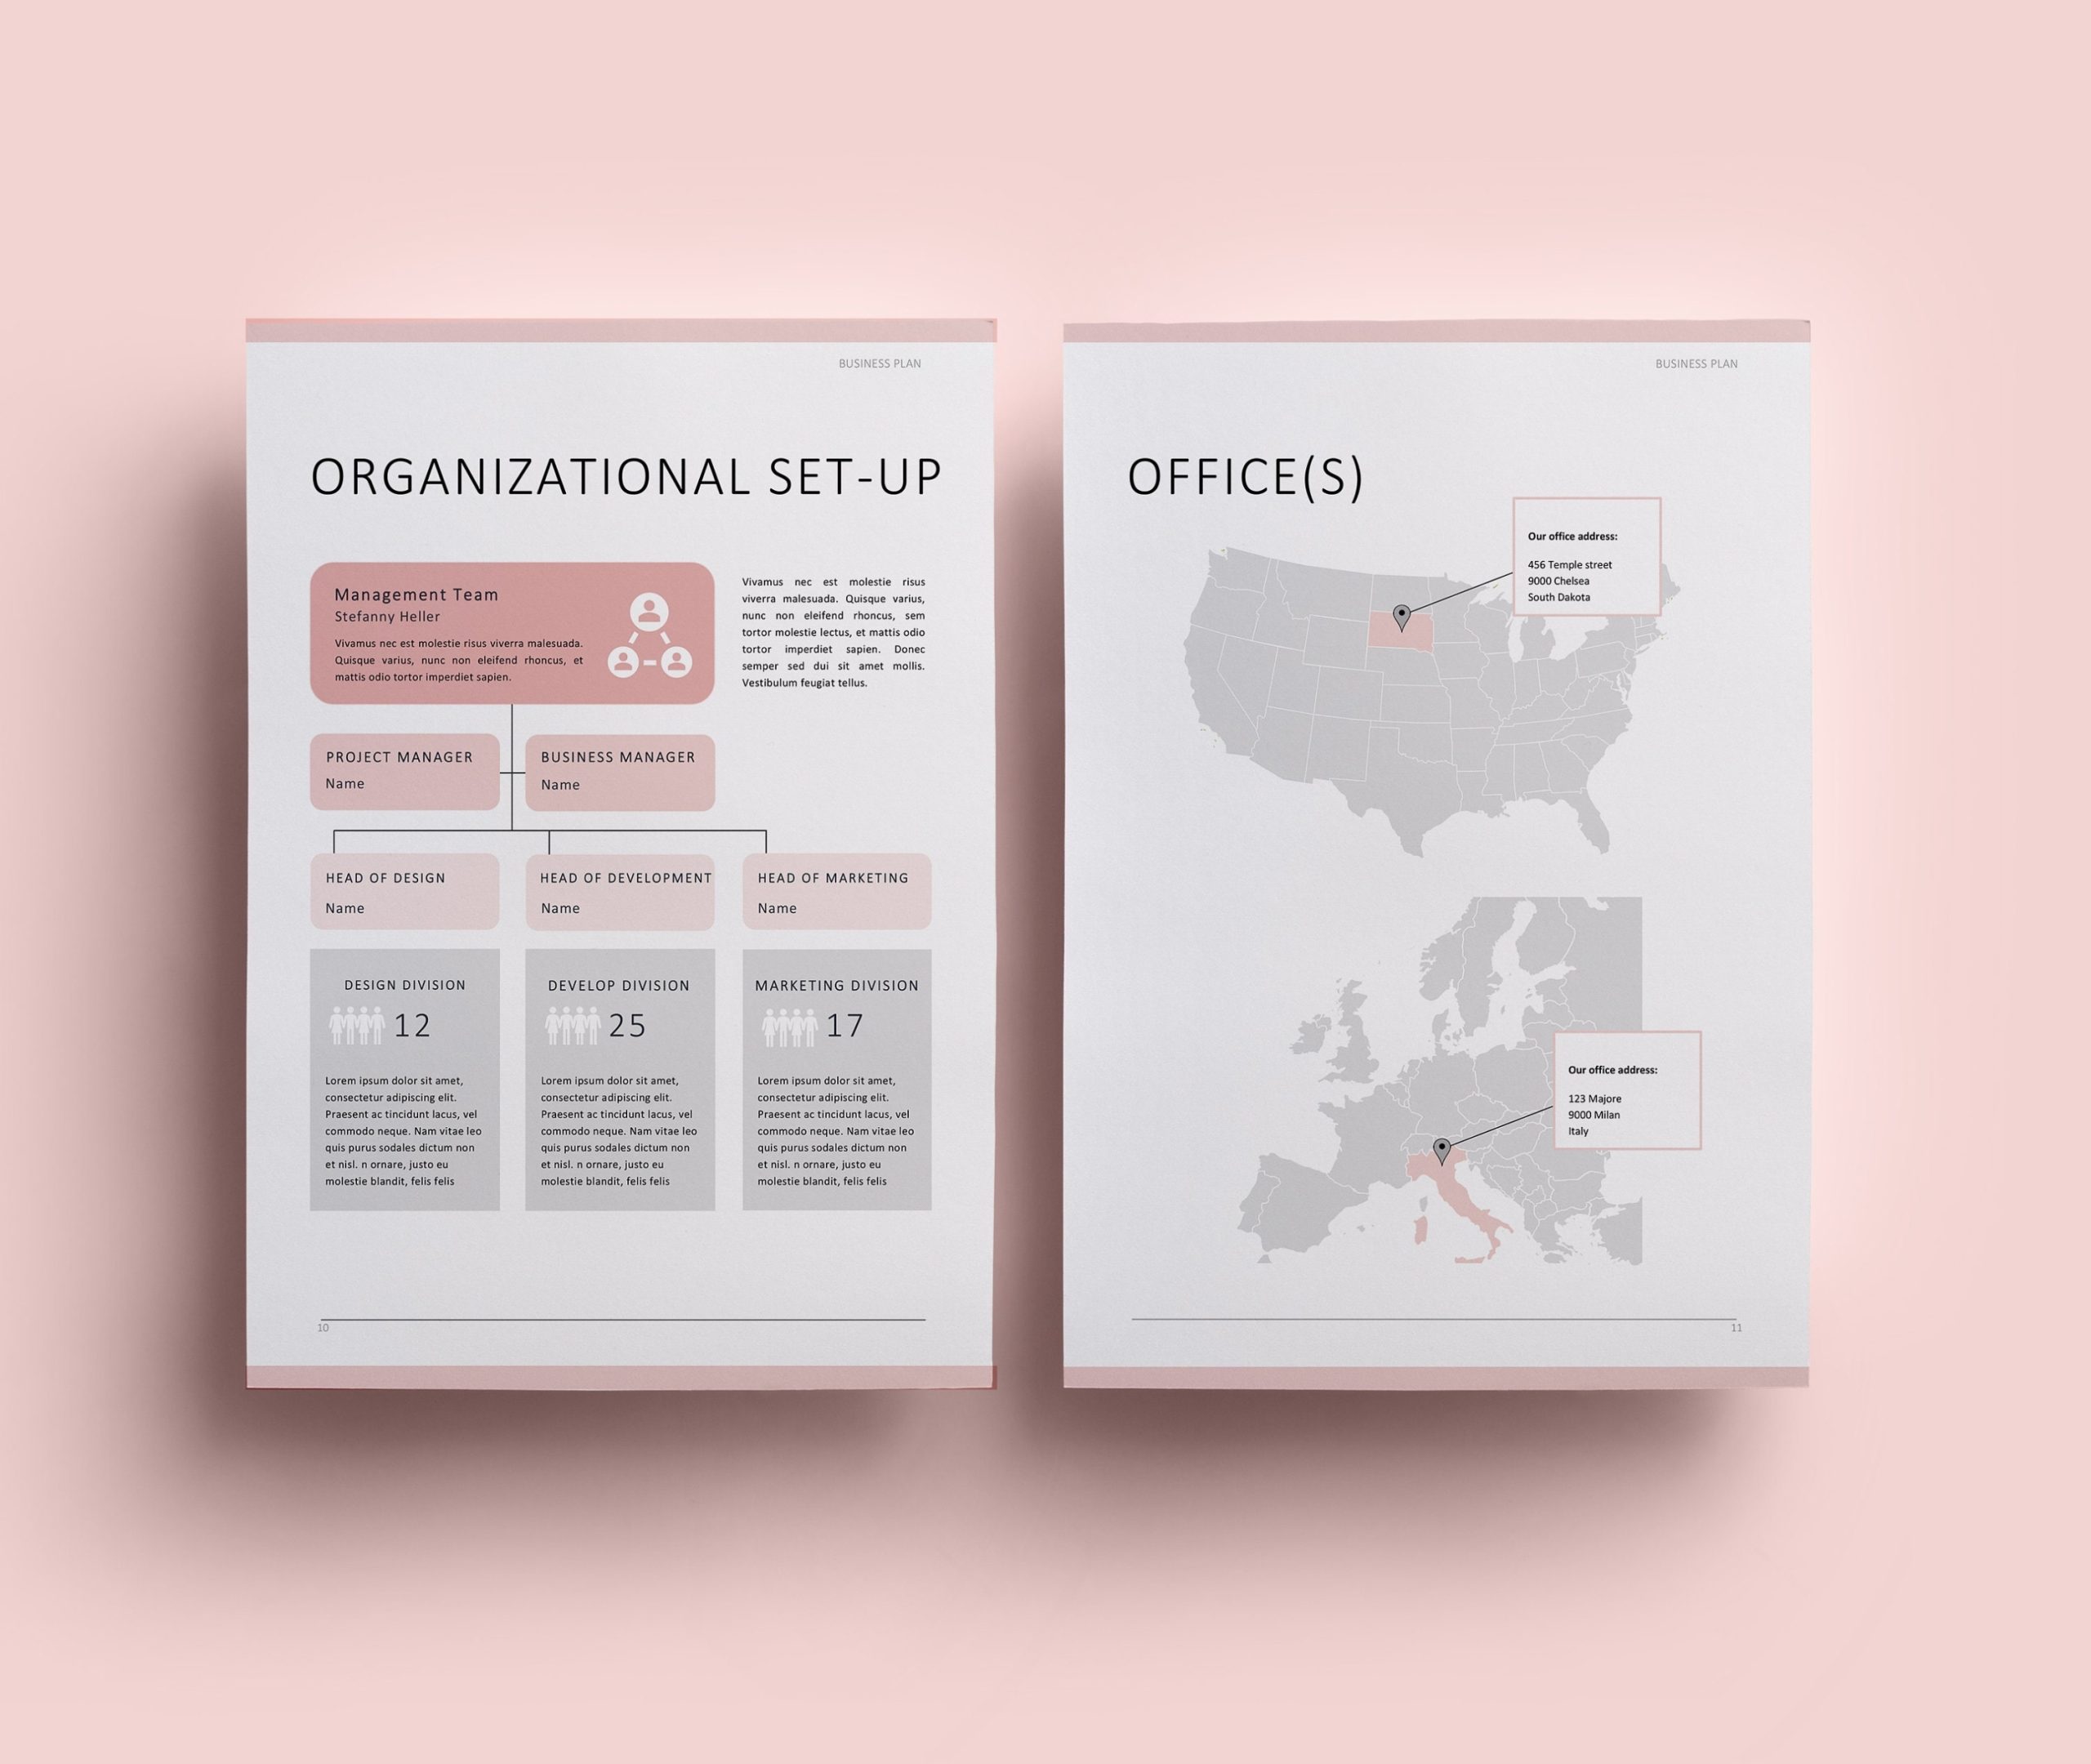 Stylish Business Plan Template | Small Business Plan | Startup Business Plan | Instant Download Inside Microsoft Business Templates Small Business